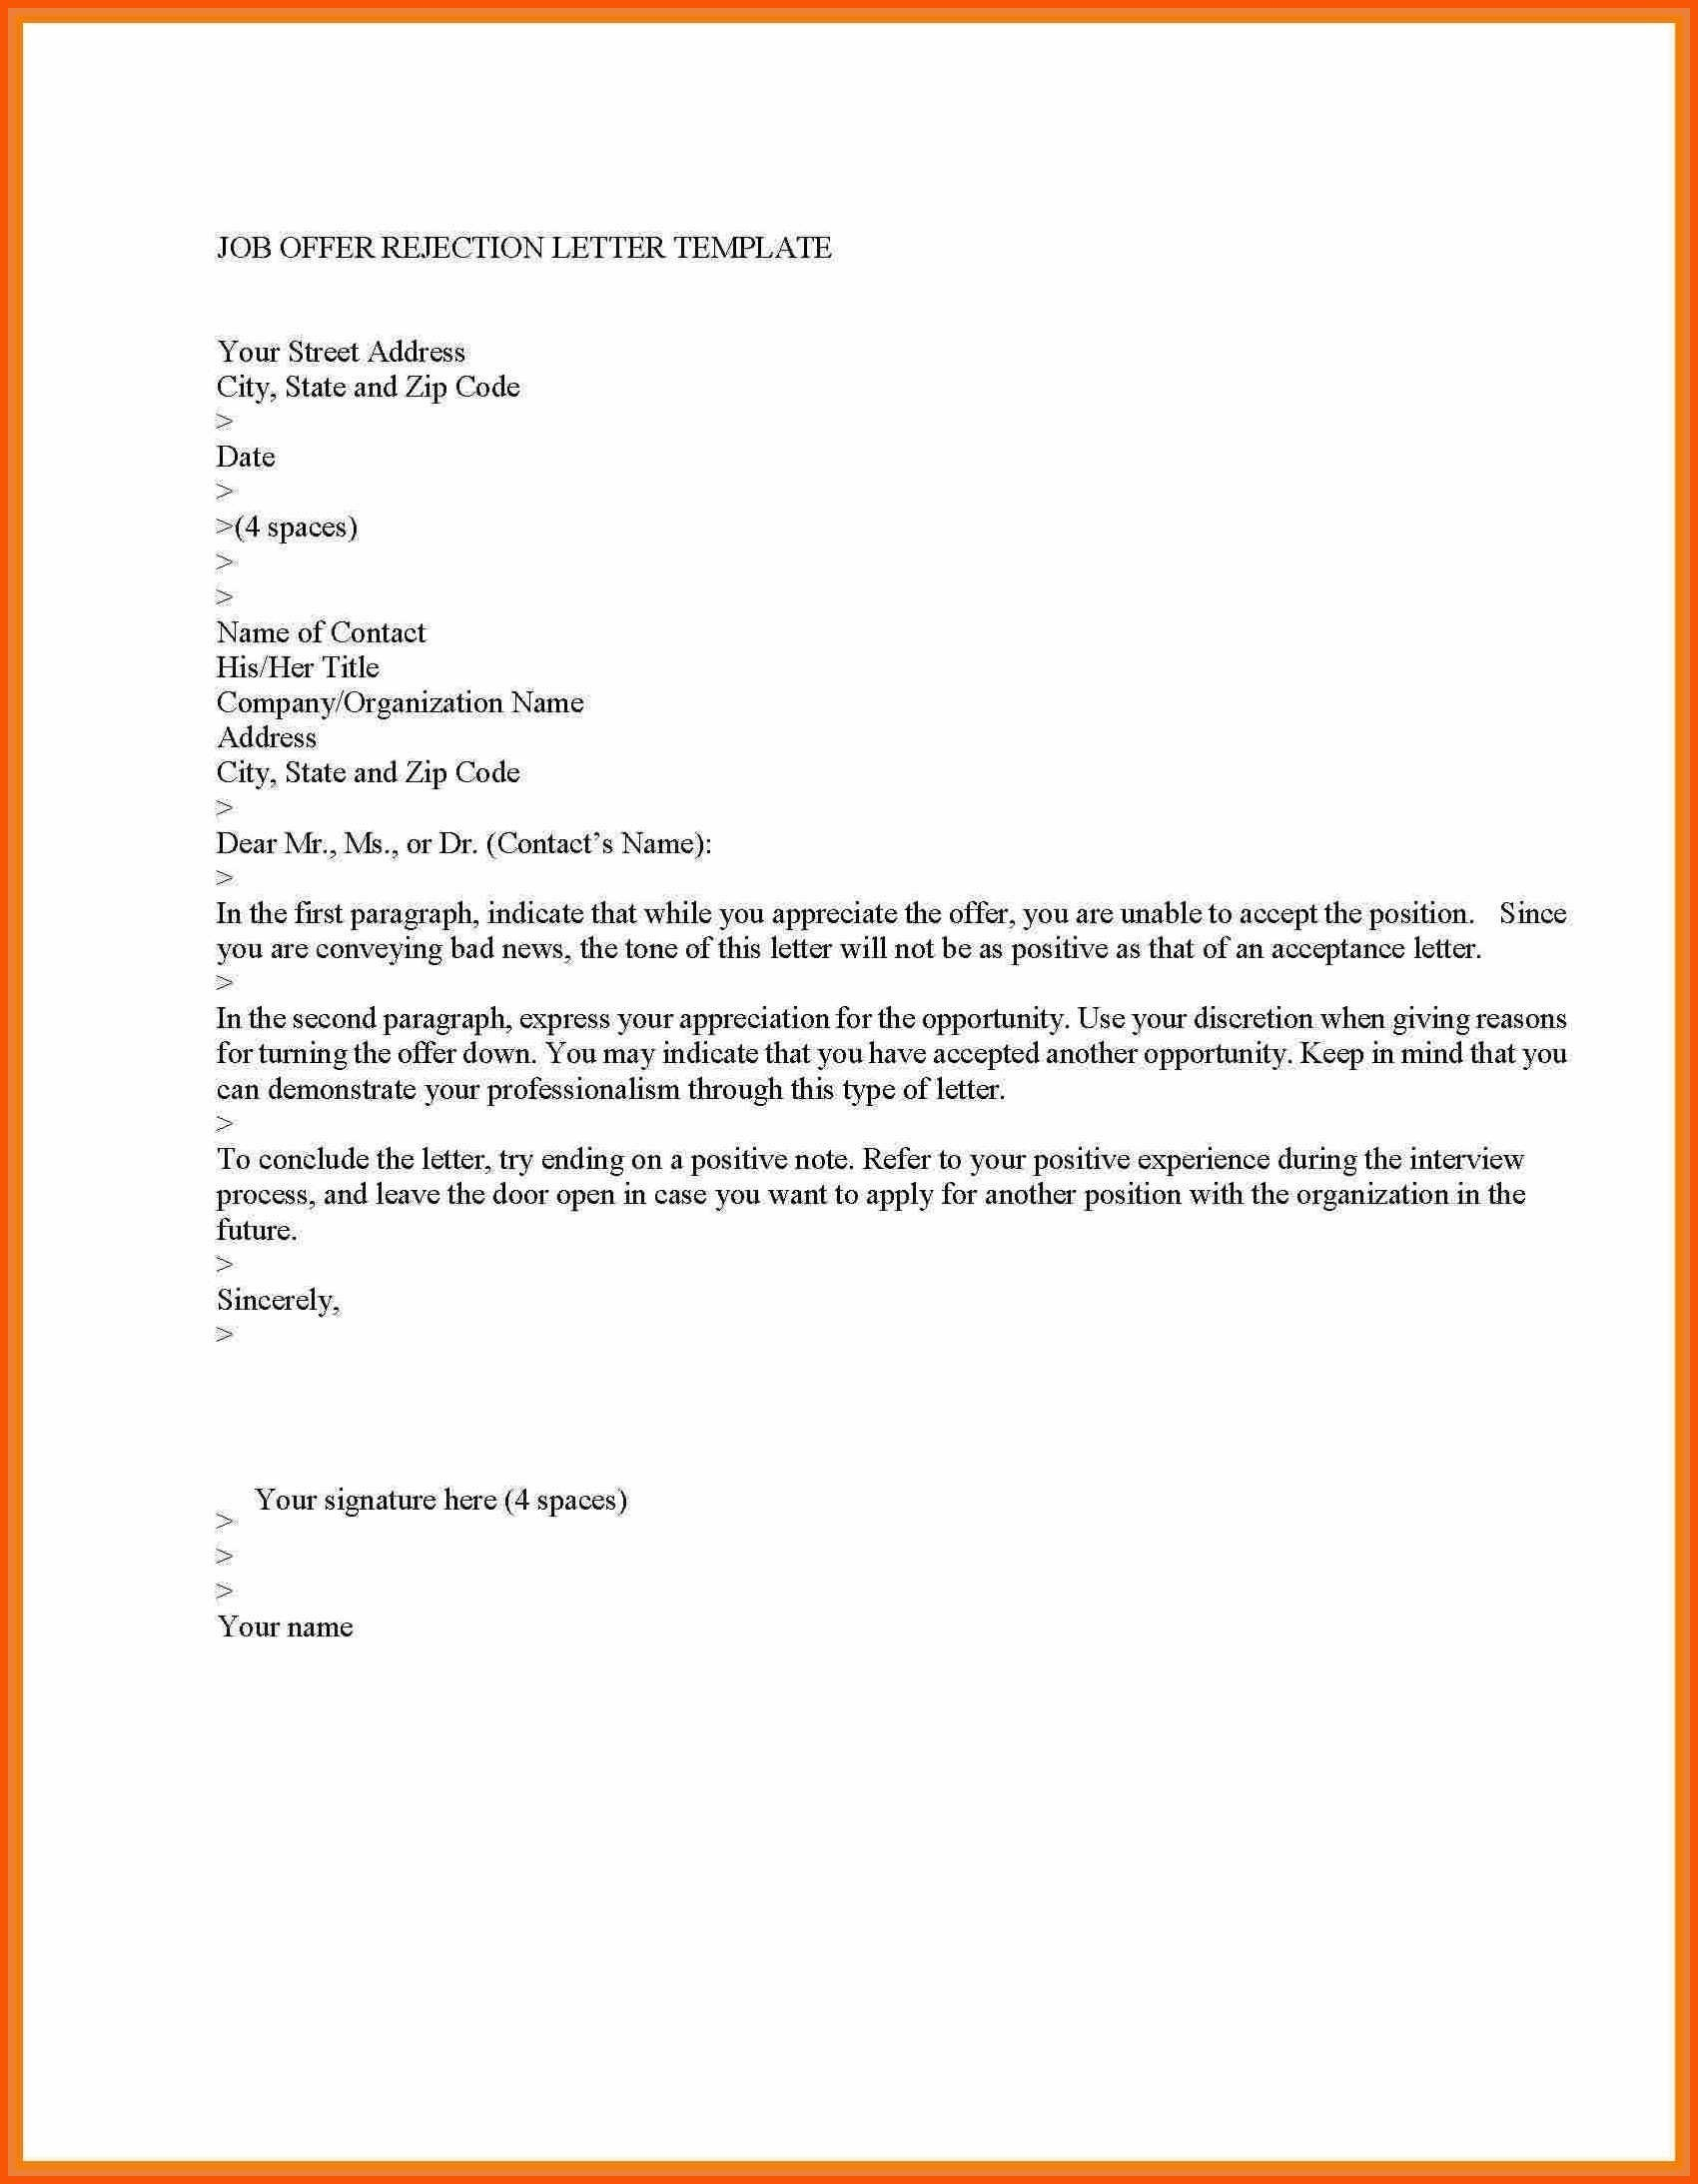 Rejection Letter Template Samples - Letter Template Collection